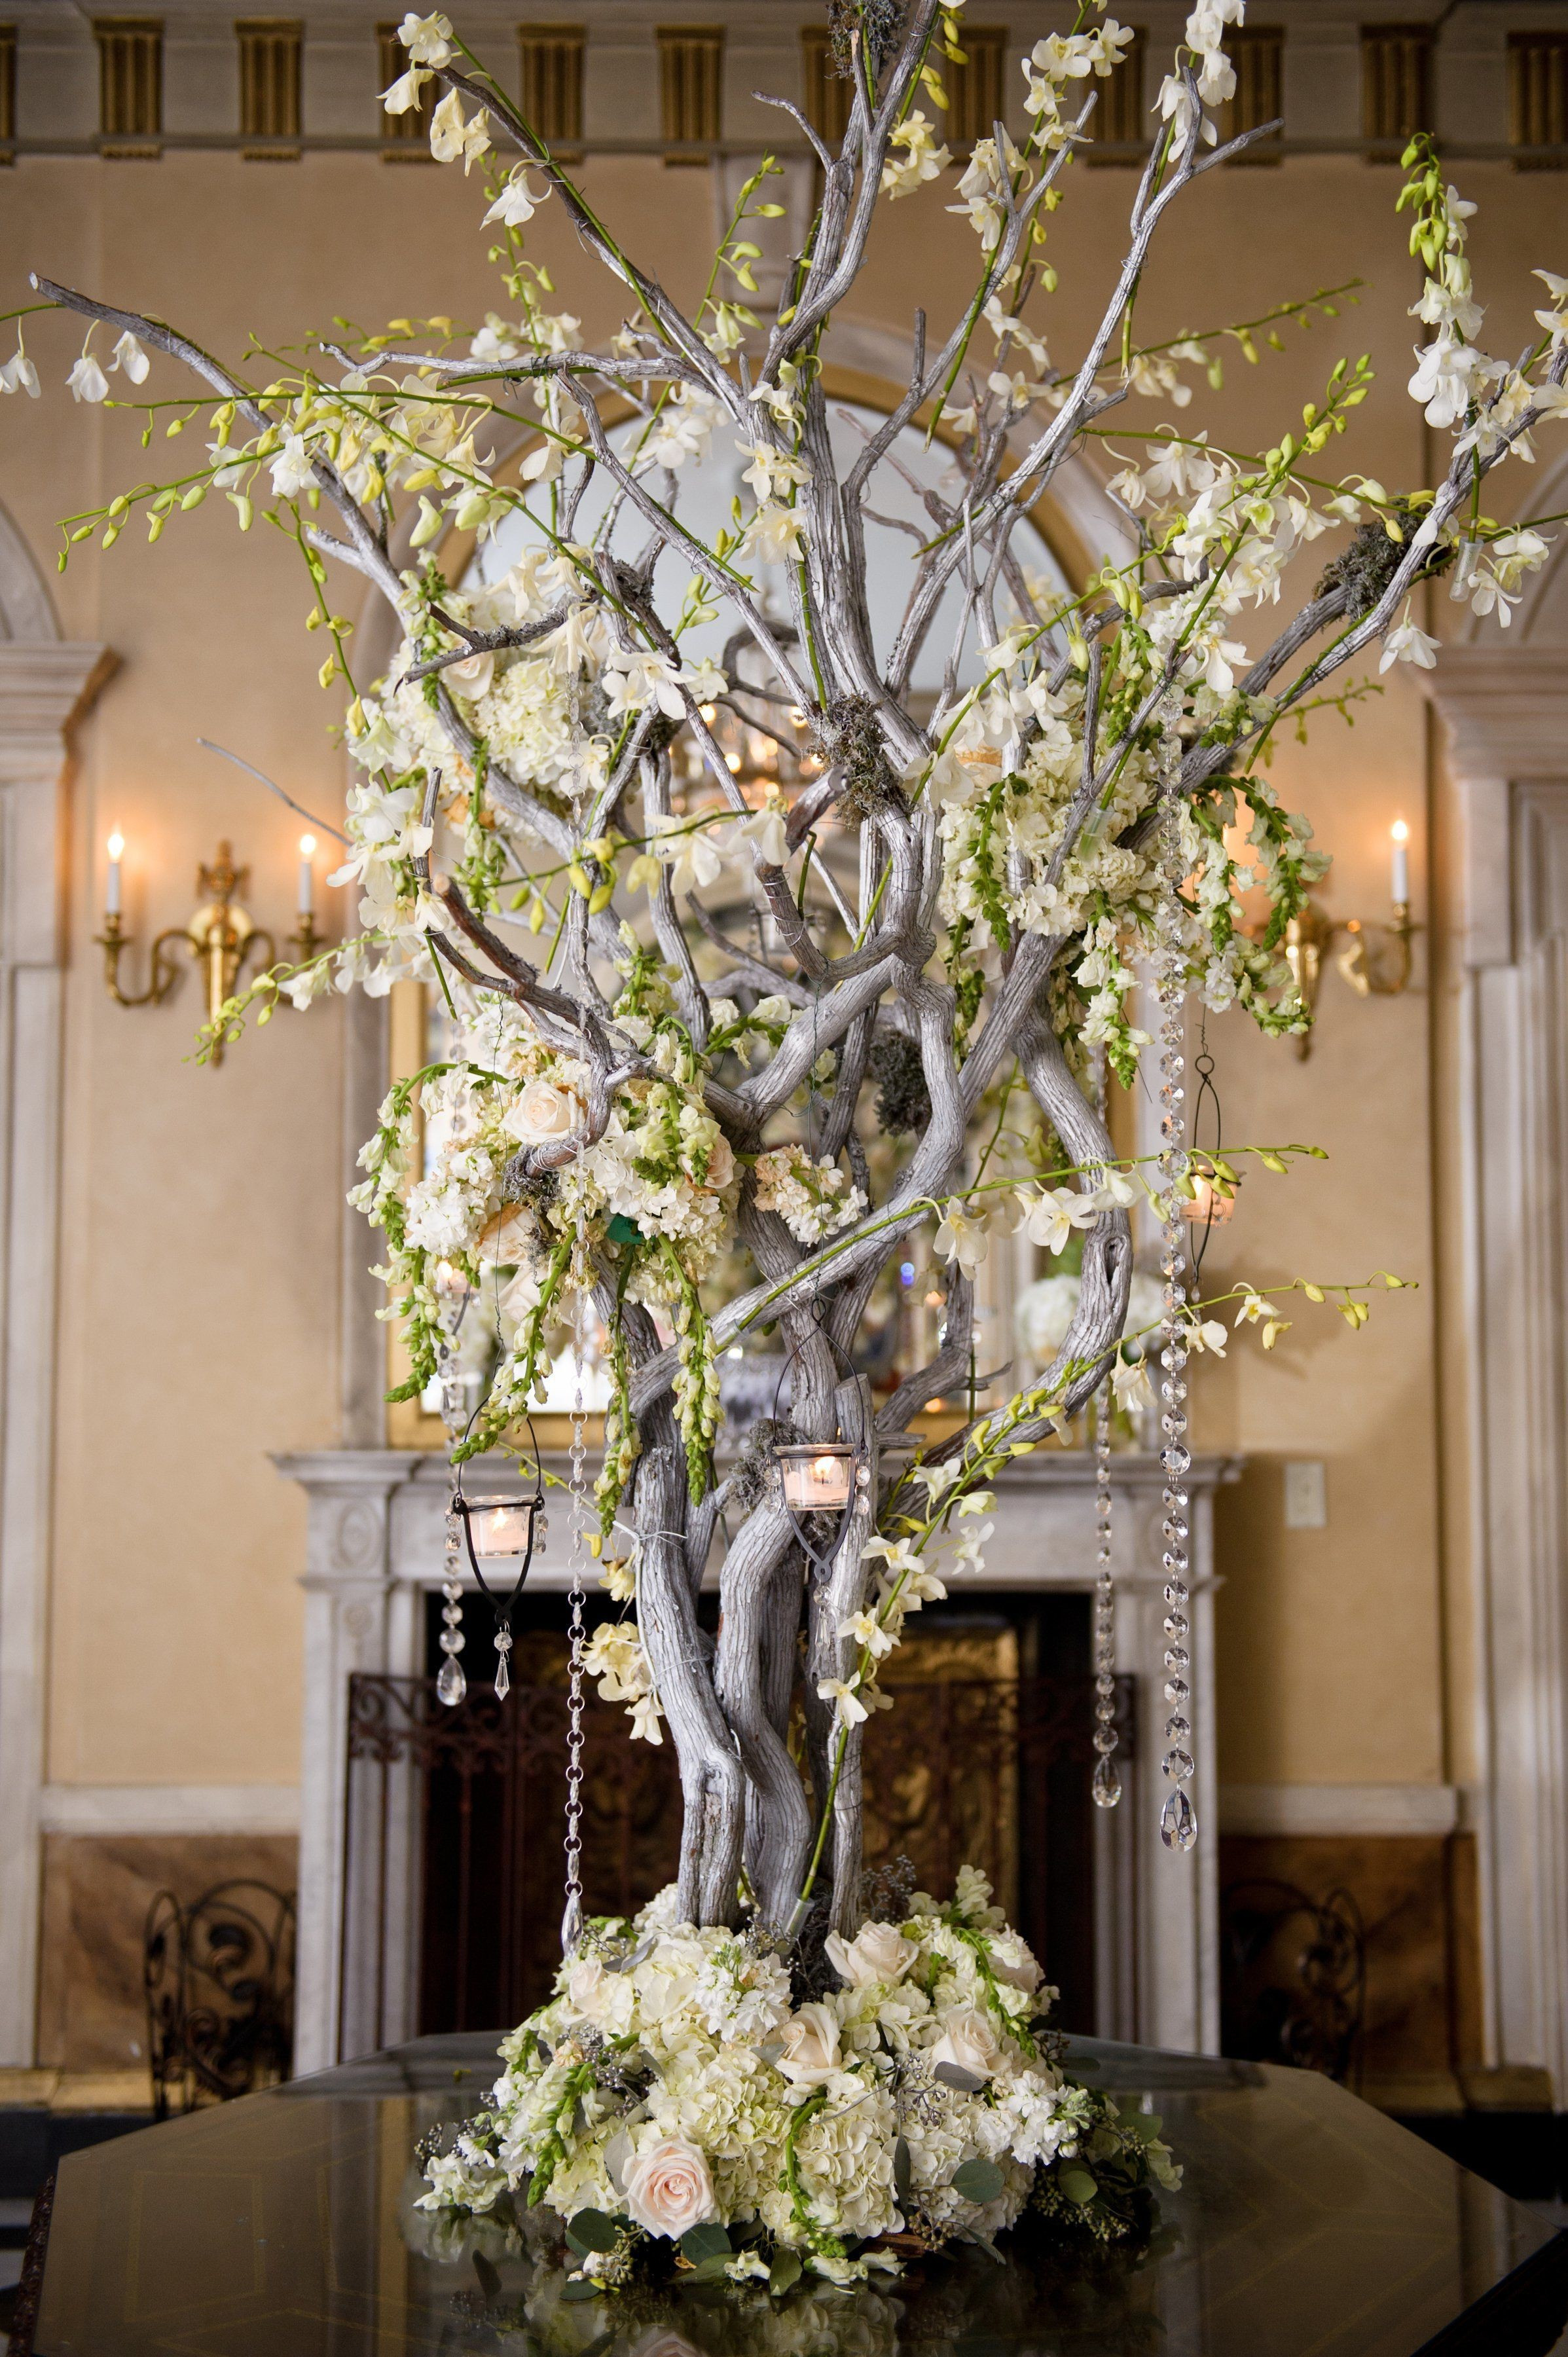 Decorative Floor Vases with Flowers Of Decorative Branches for Weddings Awesome Tall Vase Centerpiece Ideas with Decorative Branches for Weddings Best Of A Tall Arrangement Of Manzanita Branches Dripping with White Blooms